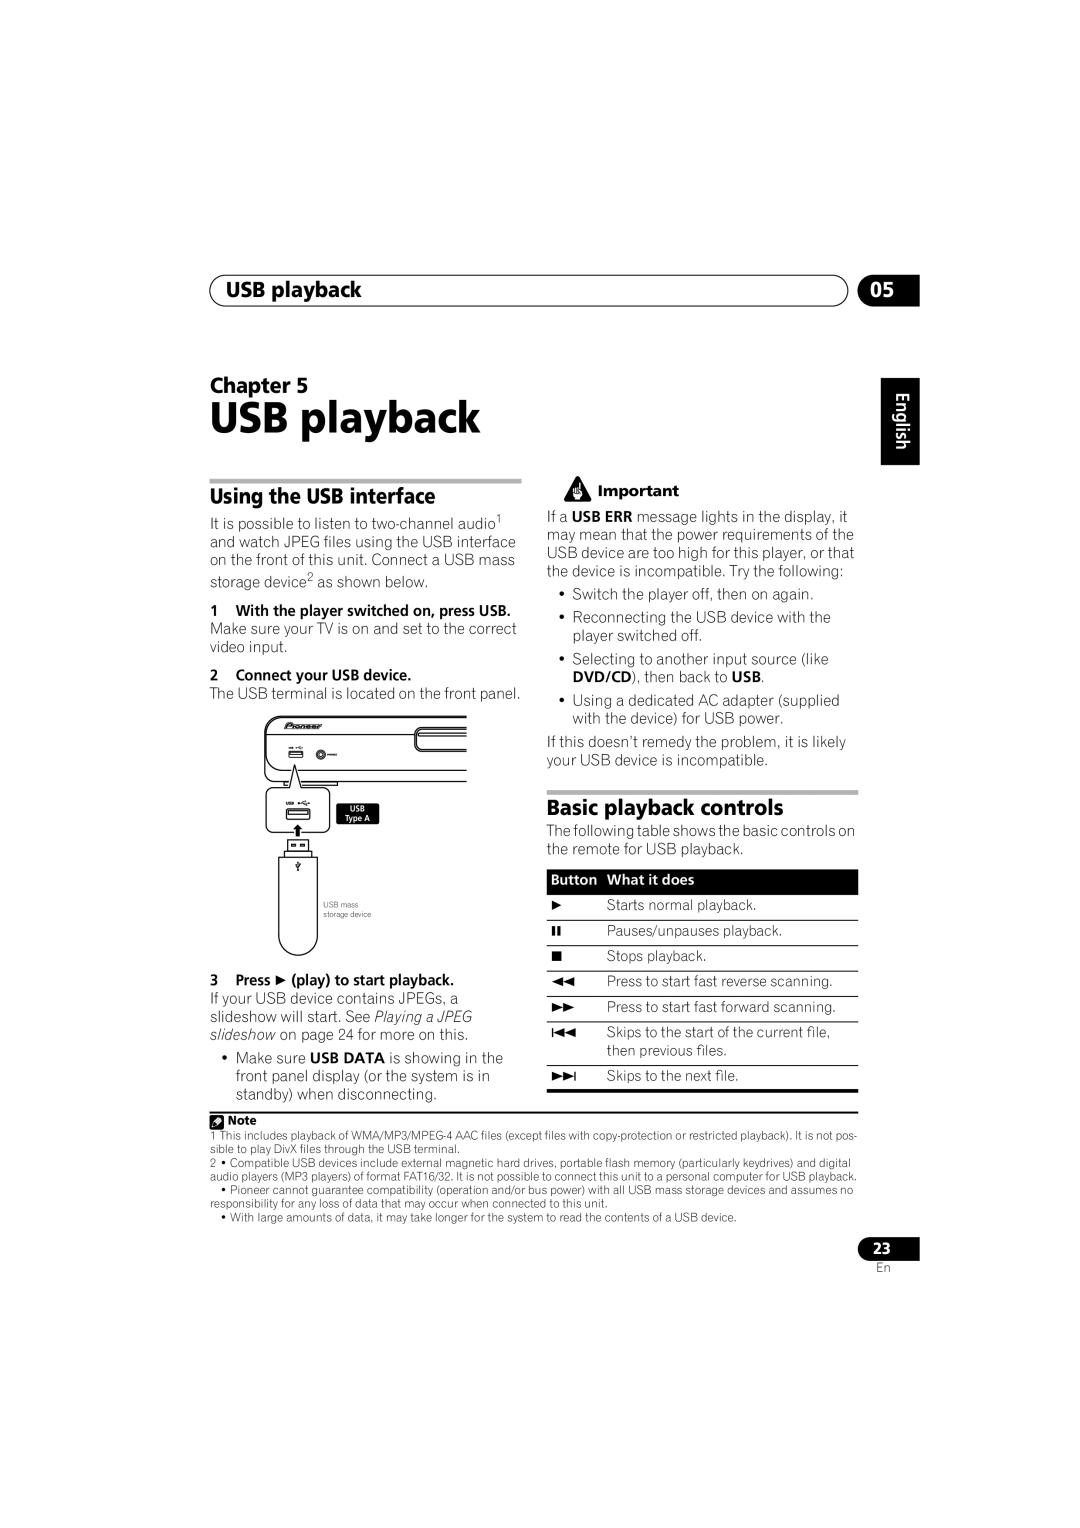 Pioneer HTZ-360DV manual USB playback Chapter, Using the USB interface, Basic playback controls, Button What it does 